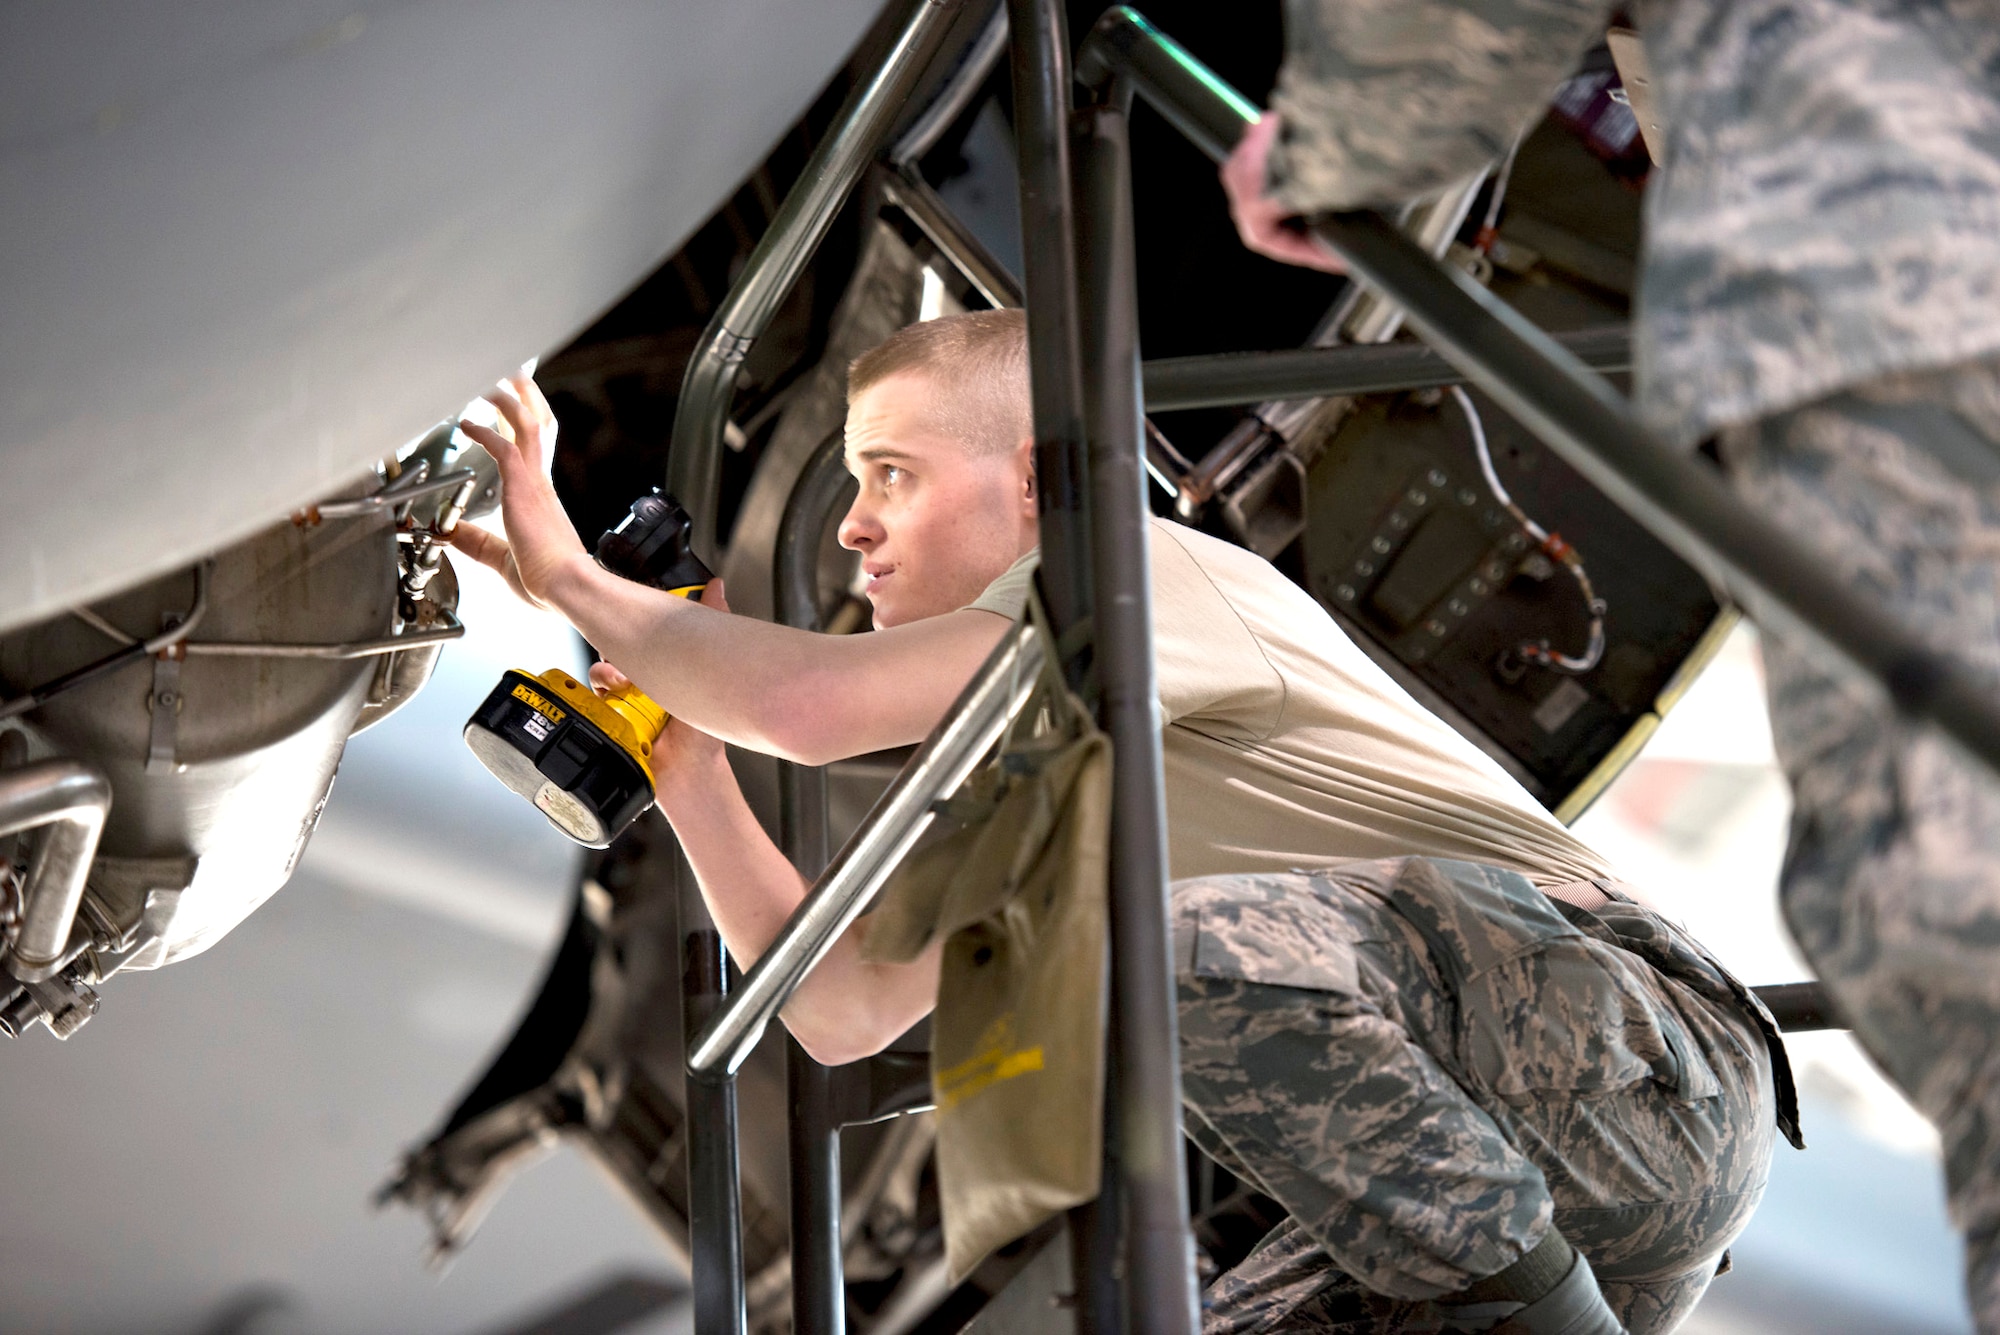 Airman First Class Josiah Evans, an aerospace propulsion journeyman, works on a C-17 Globemaster III aircraft engine, as part of a home station check, Feb. 4, at the 167th Airlift Wing. The wing's aircraft maintainers are key to keeping pace with the operations tempo.